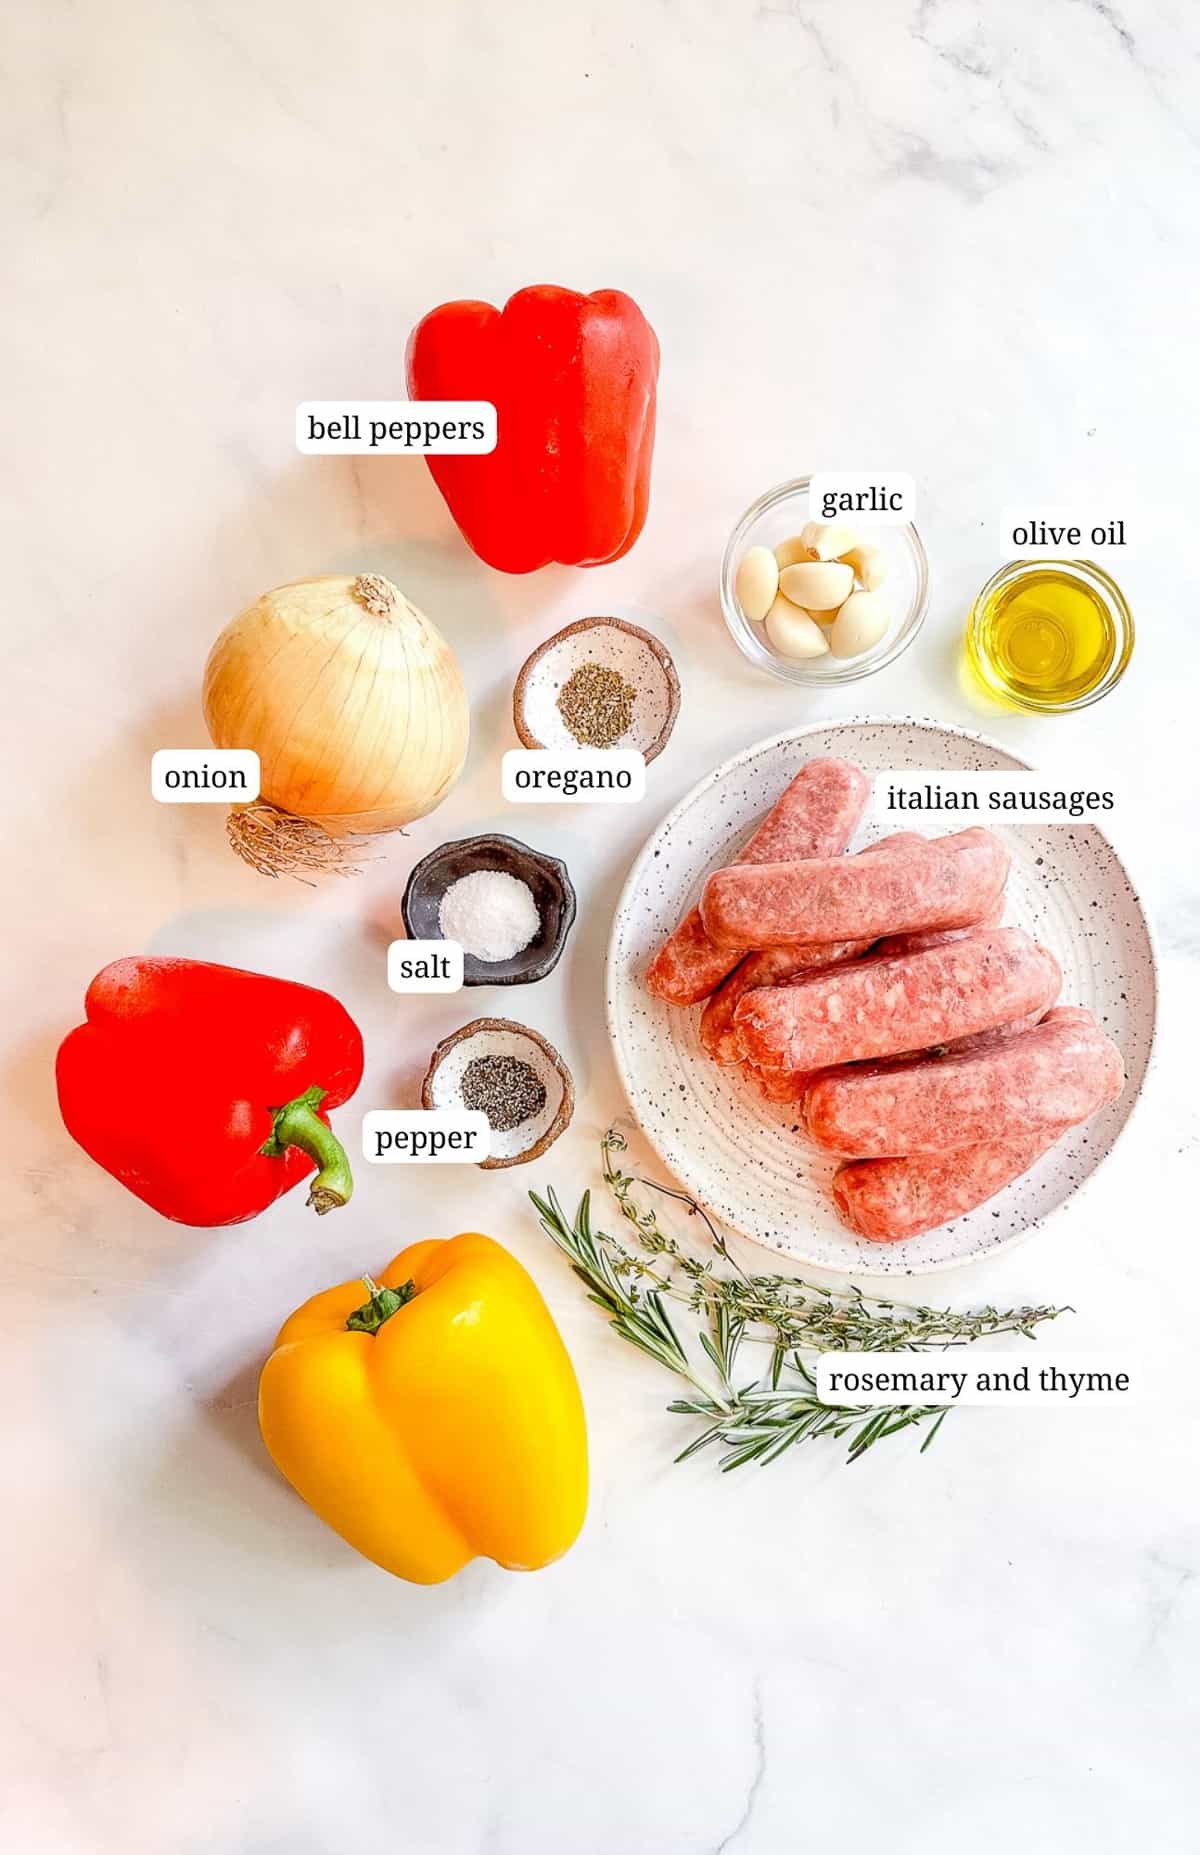 Labeled image of ingredients to make sheet pan sausage and peppers.